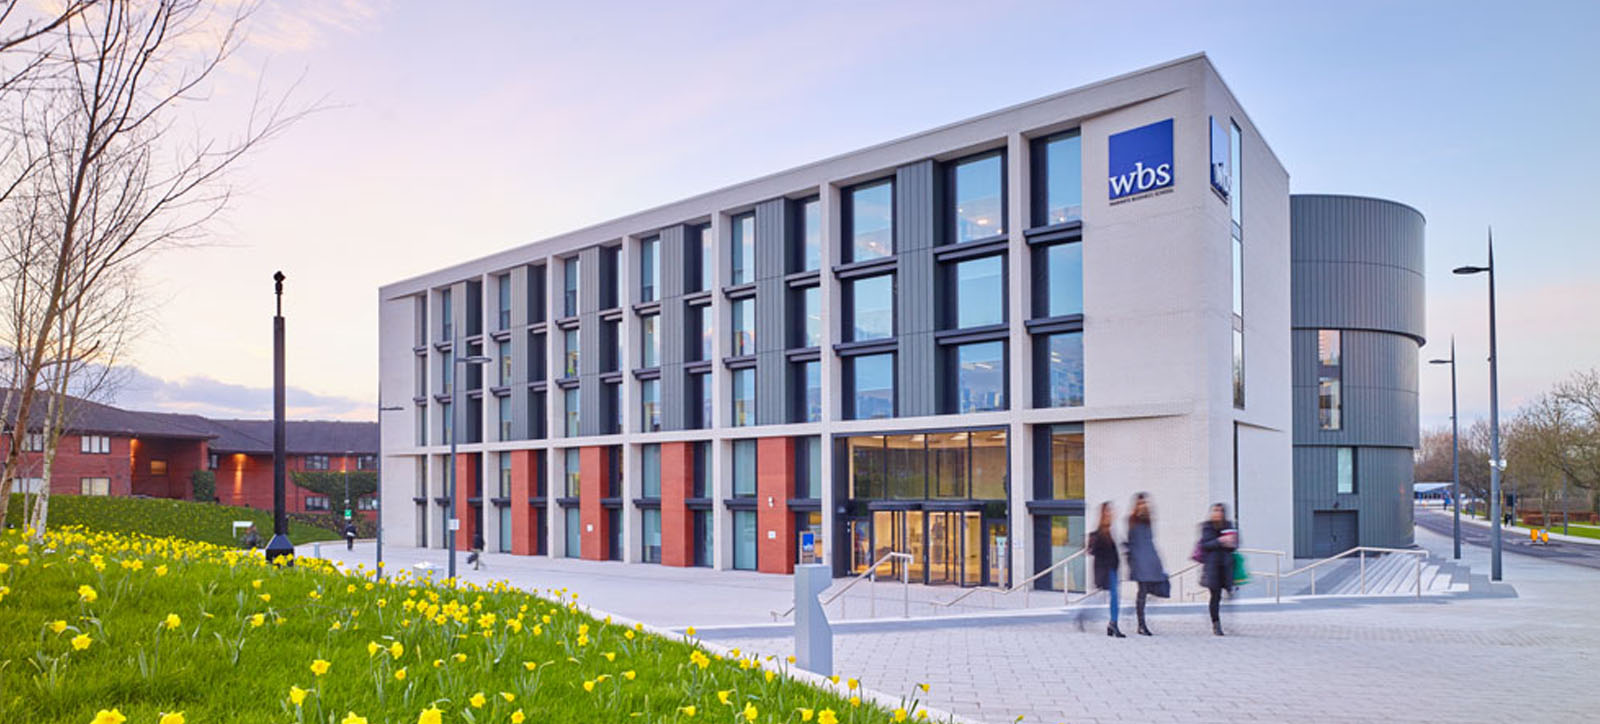 Warwick Business School was ranked among the best in the UK for its research.